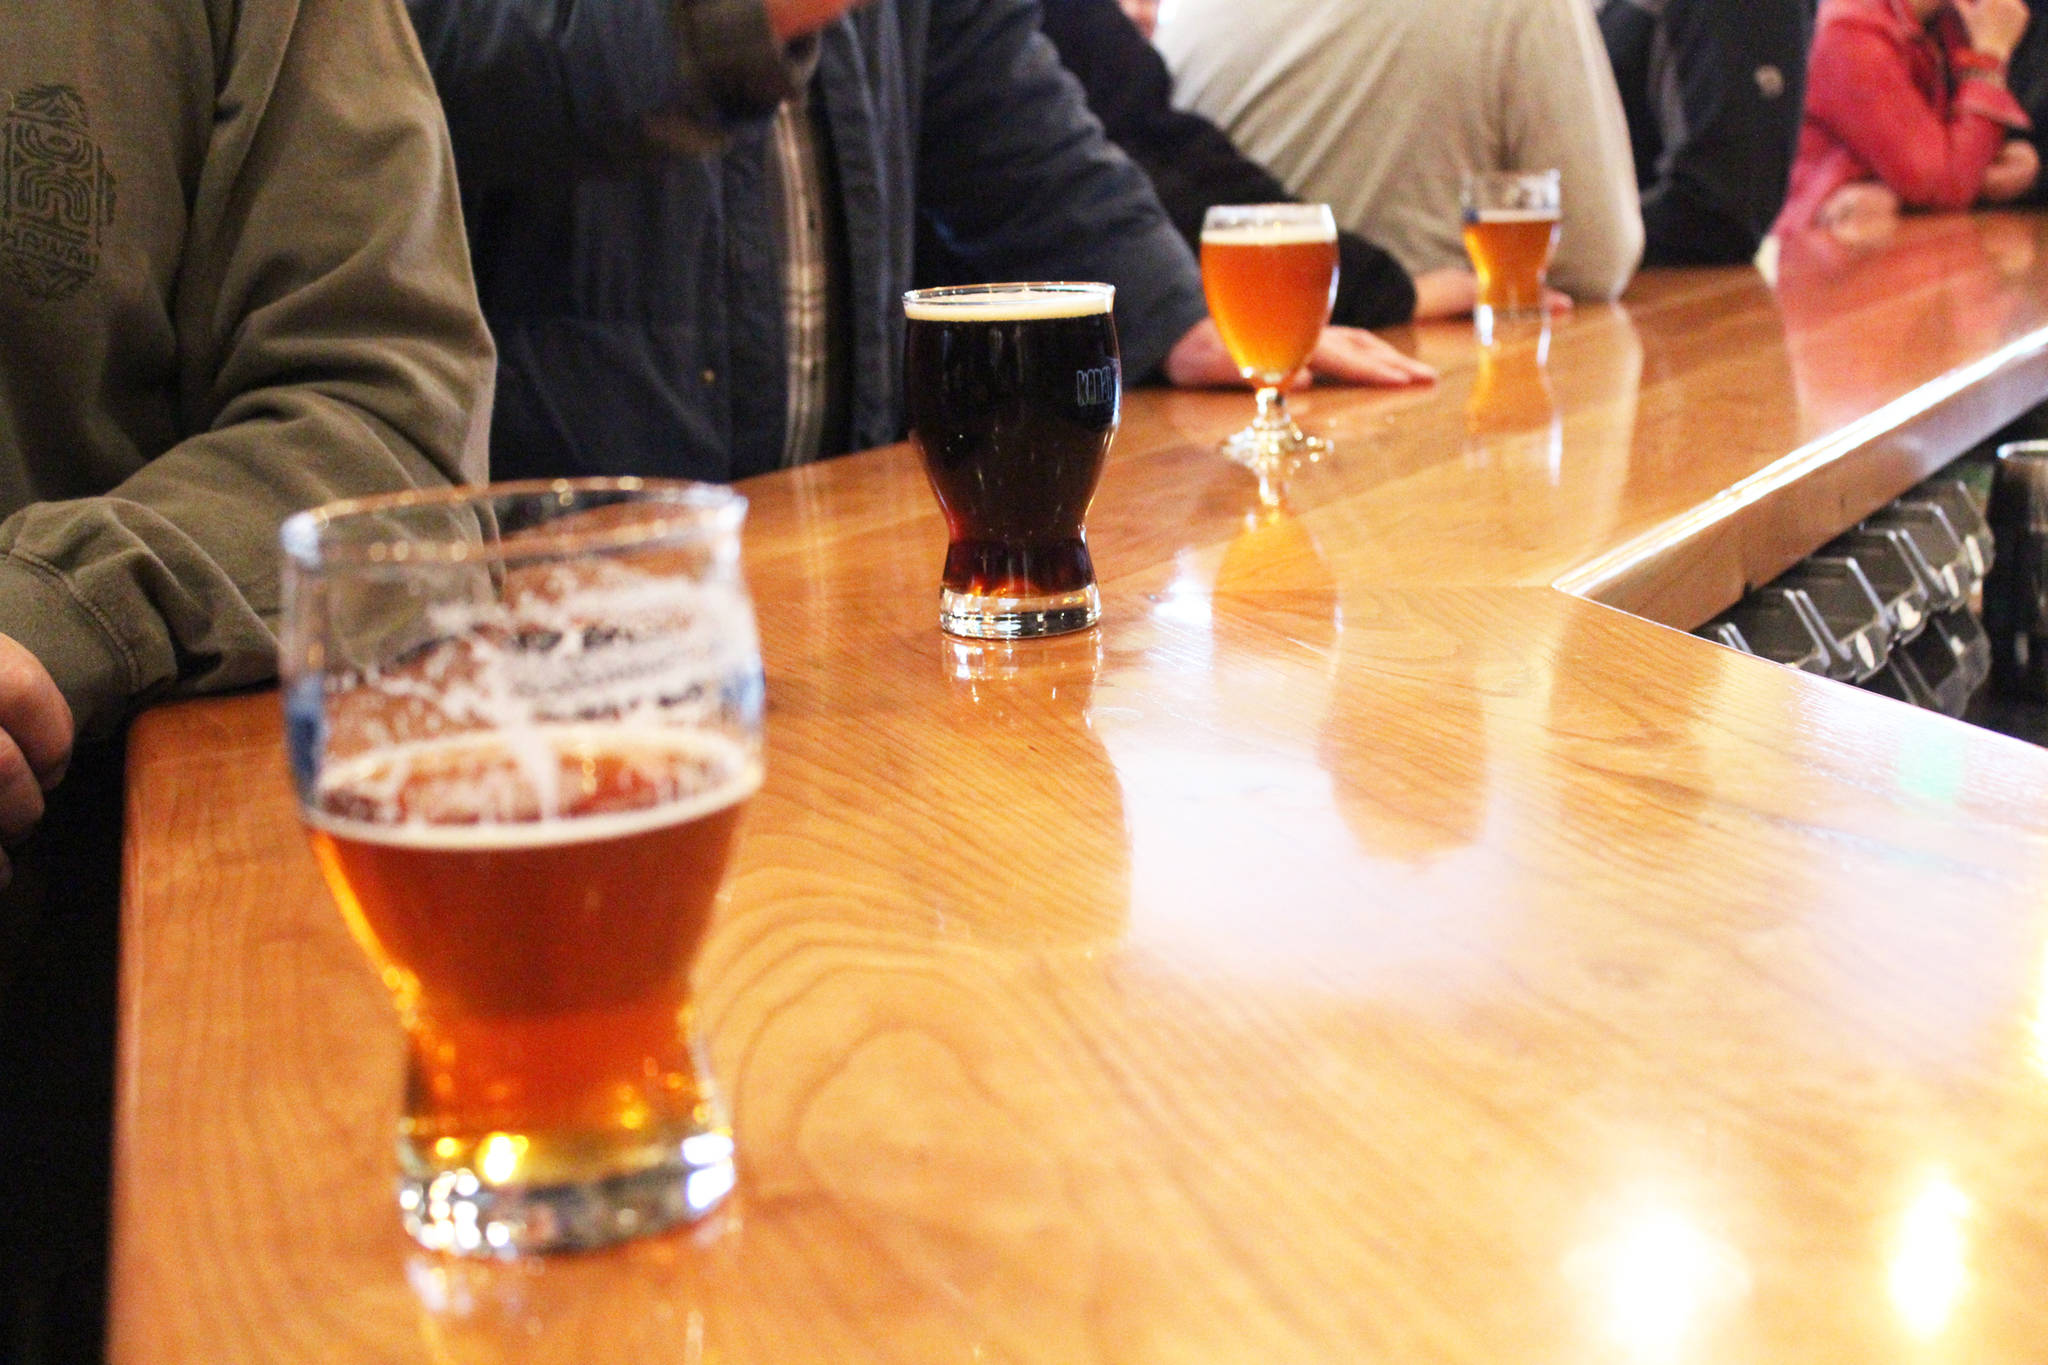 Patrons stand at the bar with their drink Friday, March 31, 2017 at Kenai River Brewing Company in Soldotna, Alaska. Soldotna is one of several communities in the state with establishments that opened under public convenience licenses, which would be transitioned to restaurant or eating place license types under SB 76, a rewrite of Alaska’s alcohol statutes. (Megan Pacer/Peninsula Clarion)